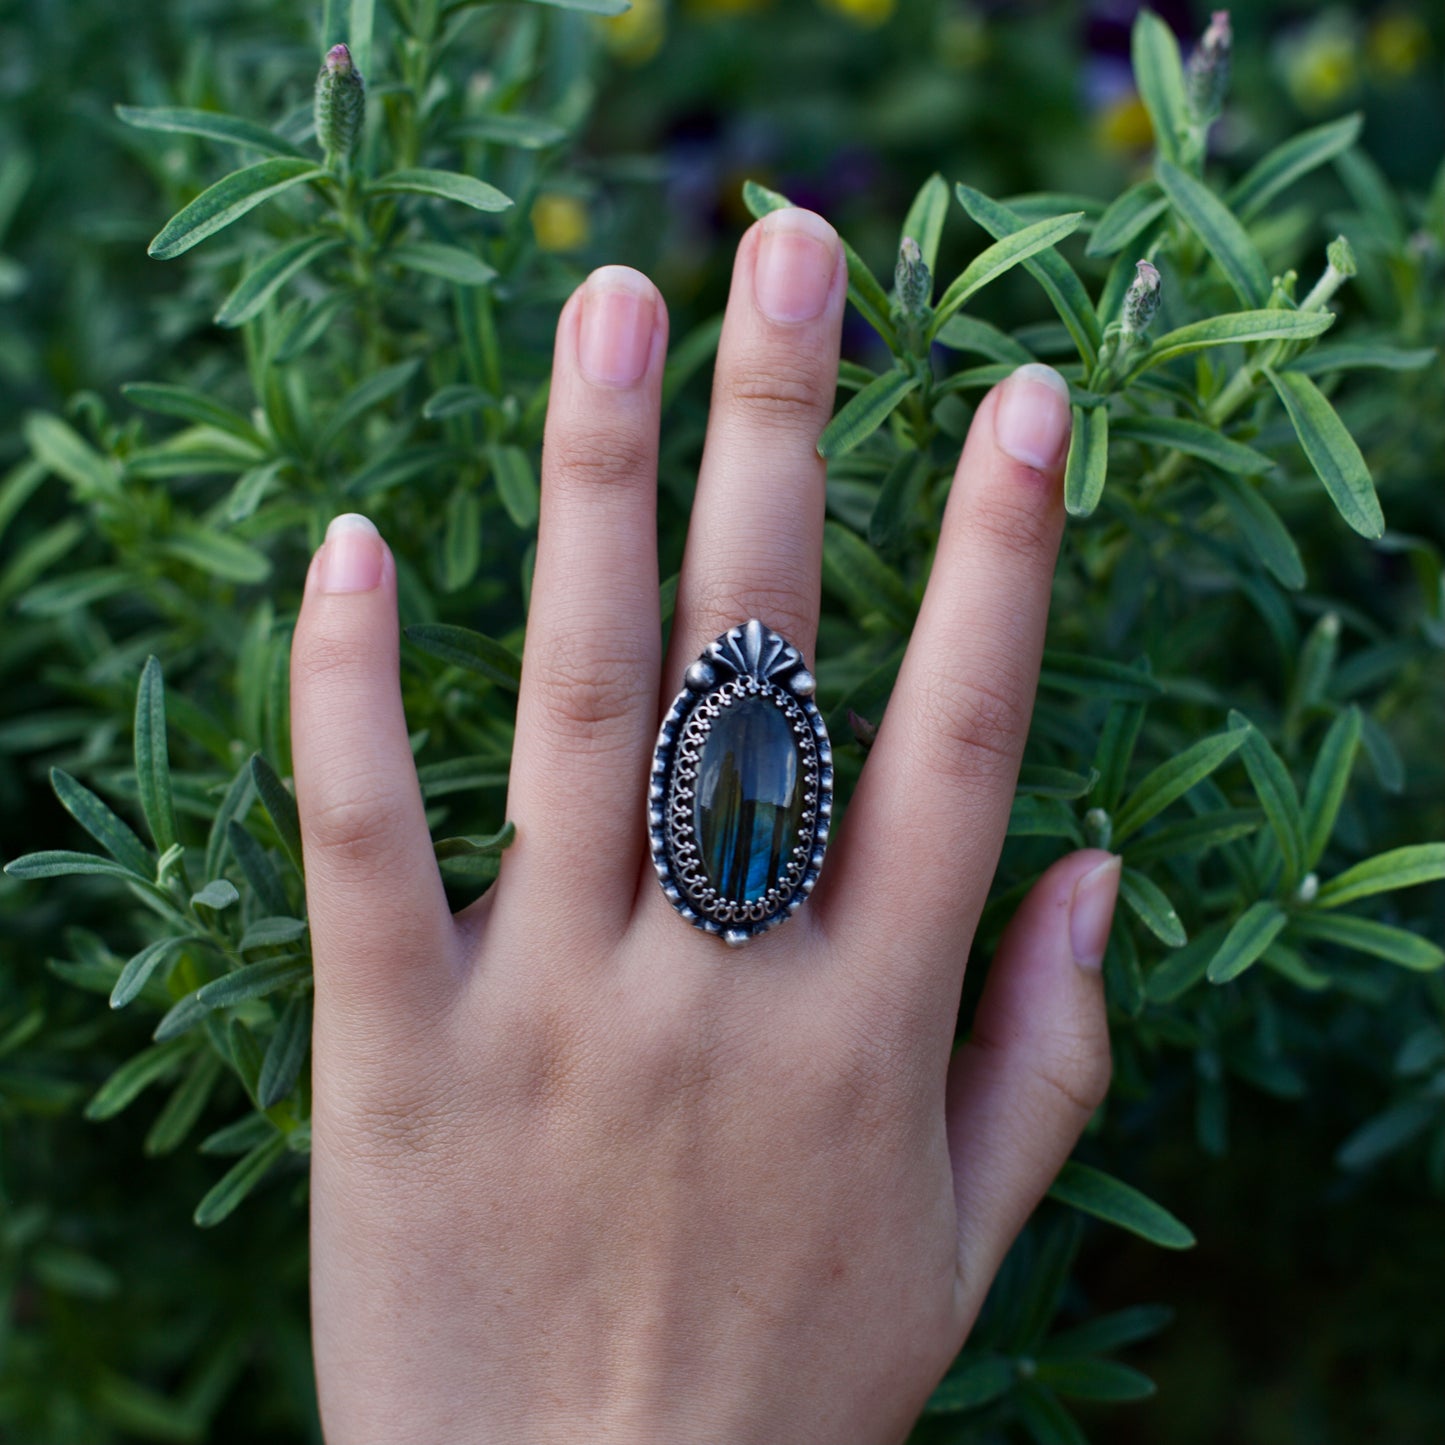 Dust Forest Rainbow Labradorite Ring - Size: 6 1/2 or M 1/2